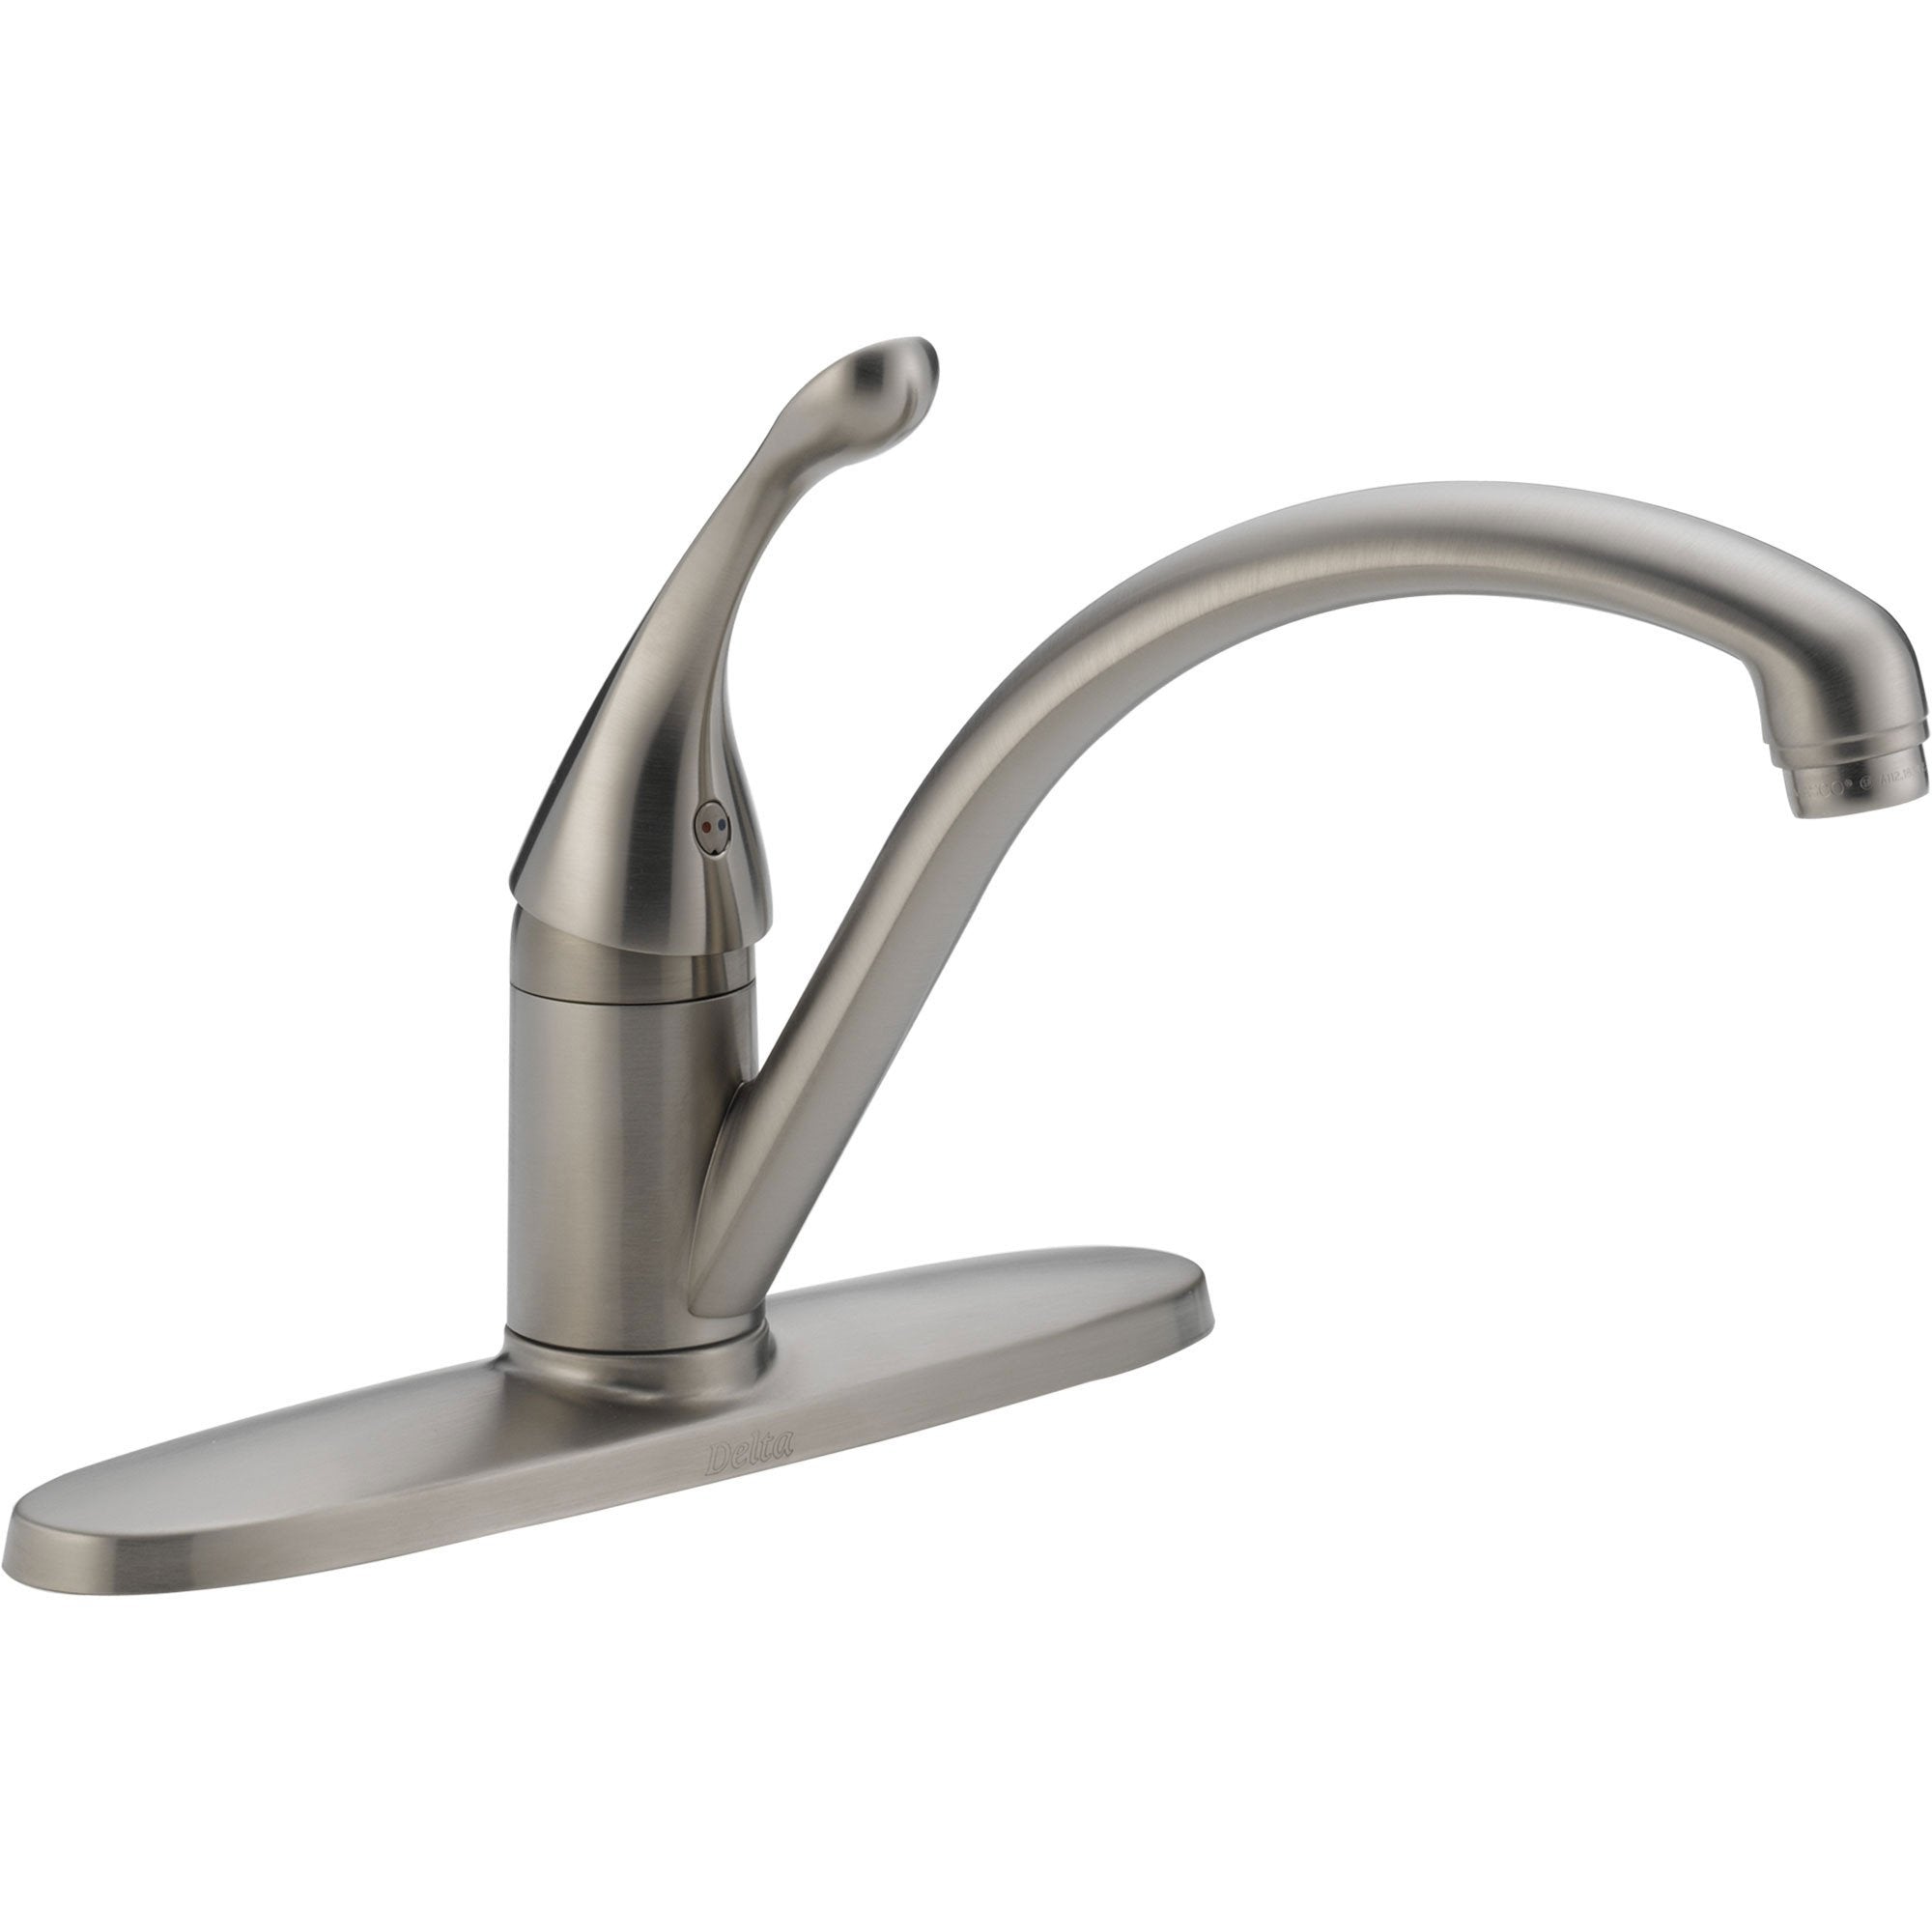 Delta Collins Lever Single Handle Kitchen Faucet in Stainless Steel 465275